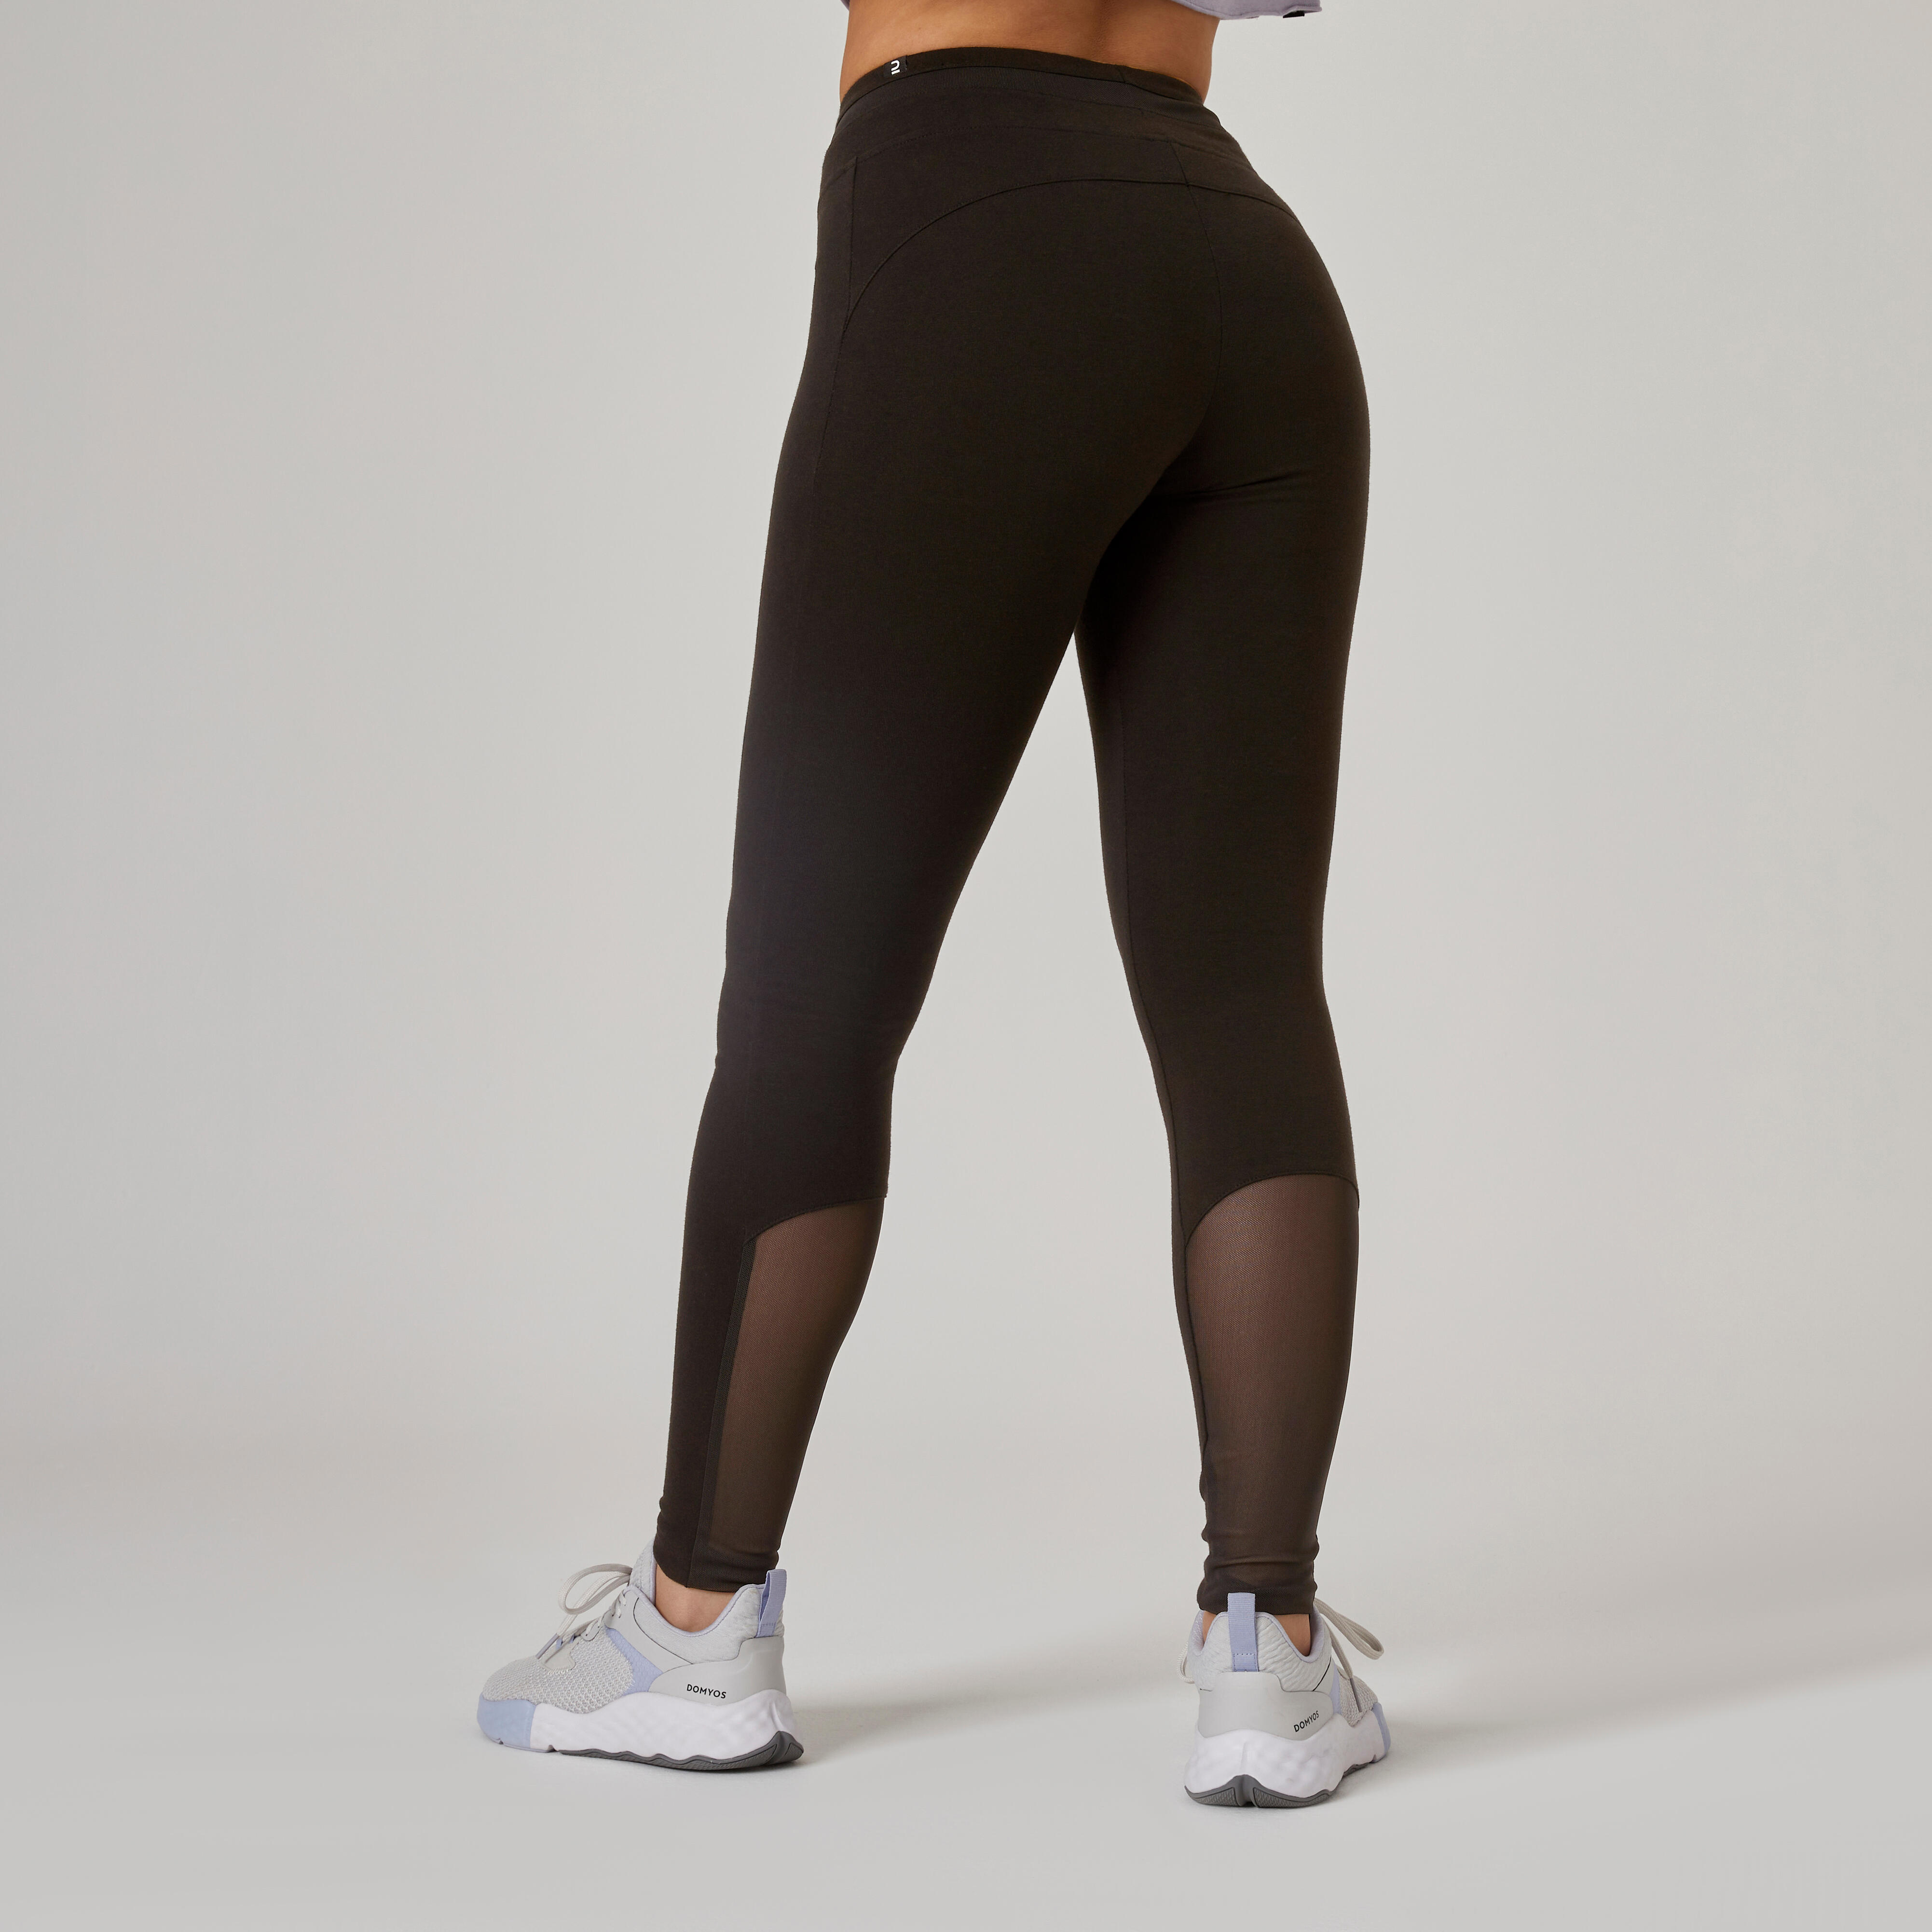 mYURA Printed Black Track Pants for Women | Women's Gym Wear Tights | Ideal  for Yoga,